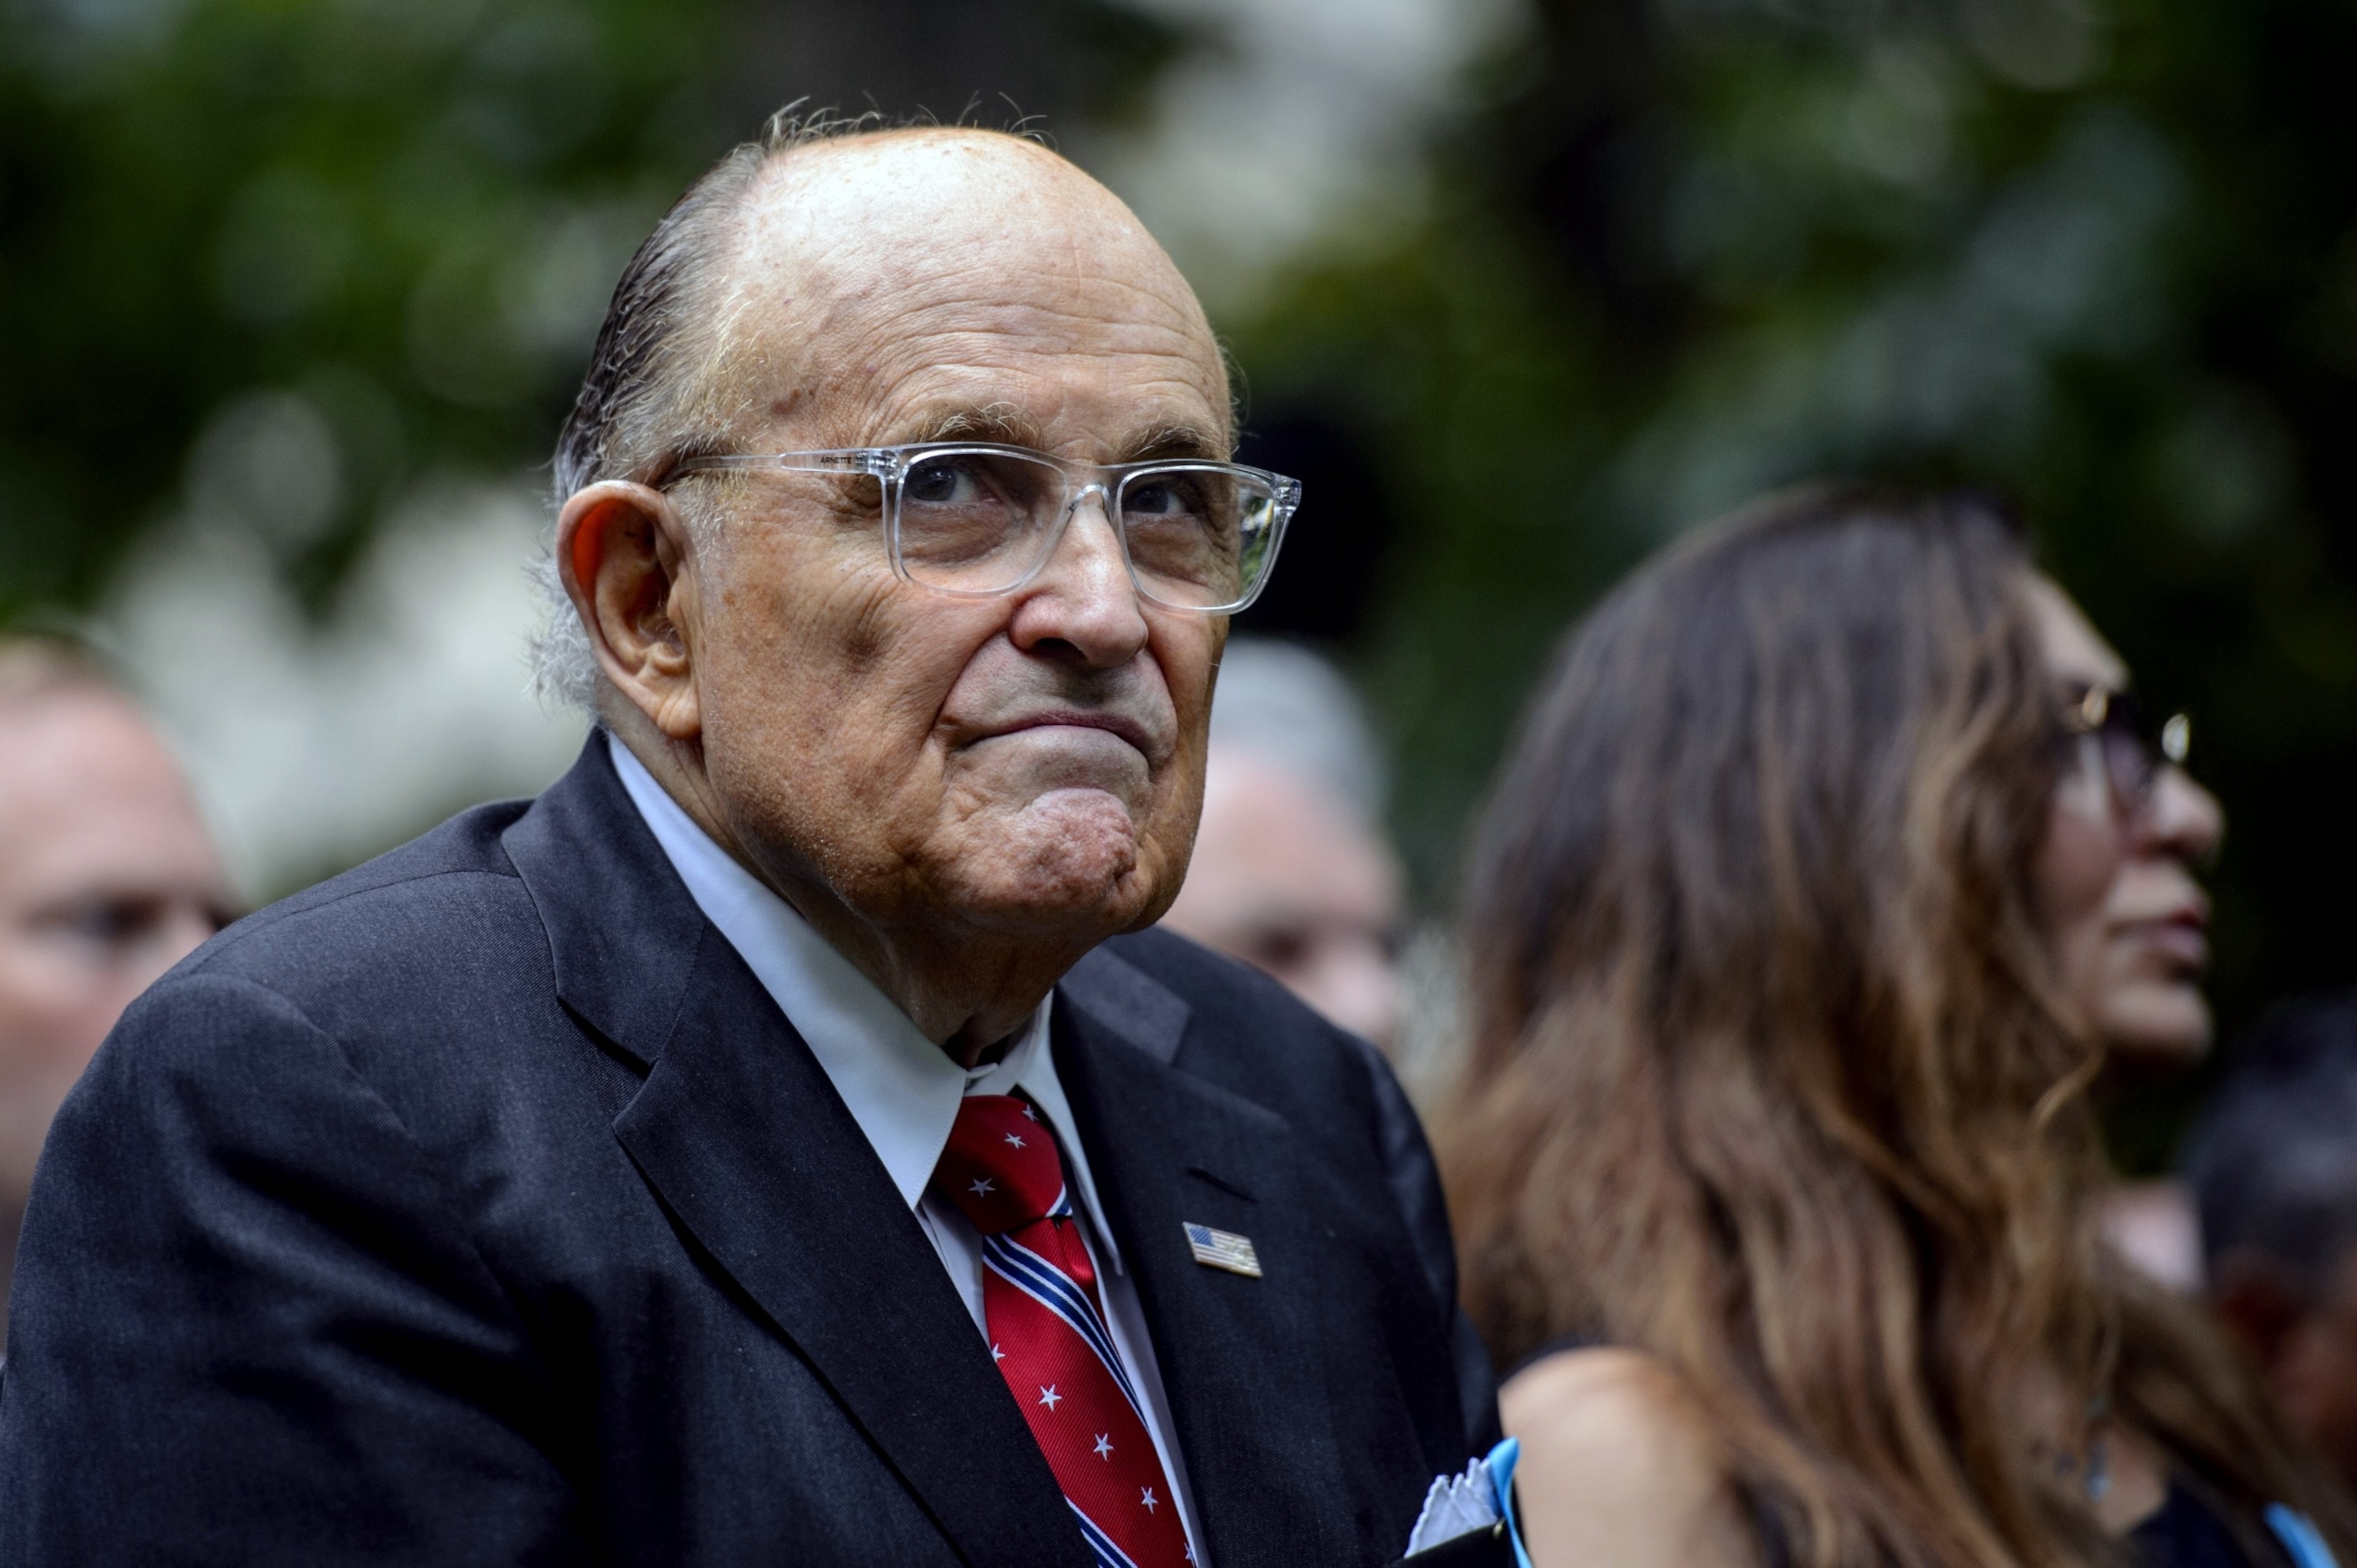 PHOTO: Rudolph Giuliani, former mayor of New York, attends a ceremony at the National September 11 Memorial Museum in New York, Sept. 11, 2022.